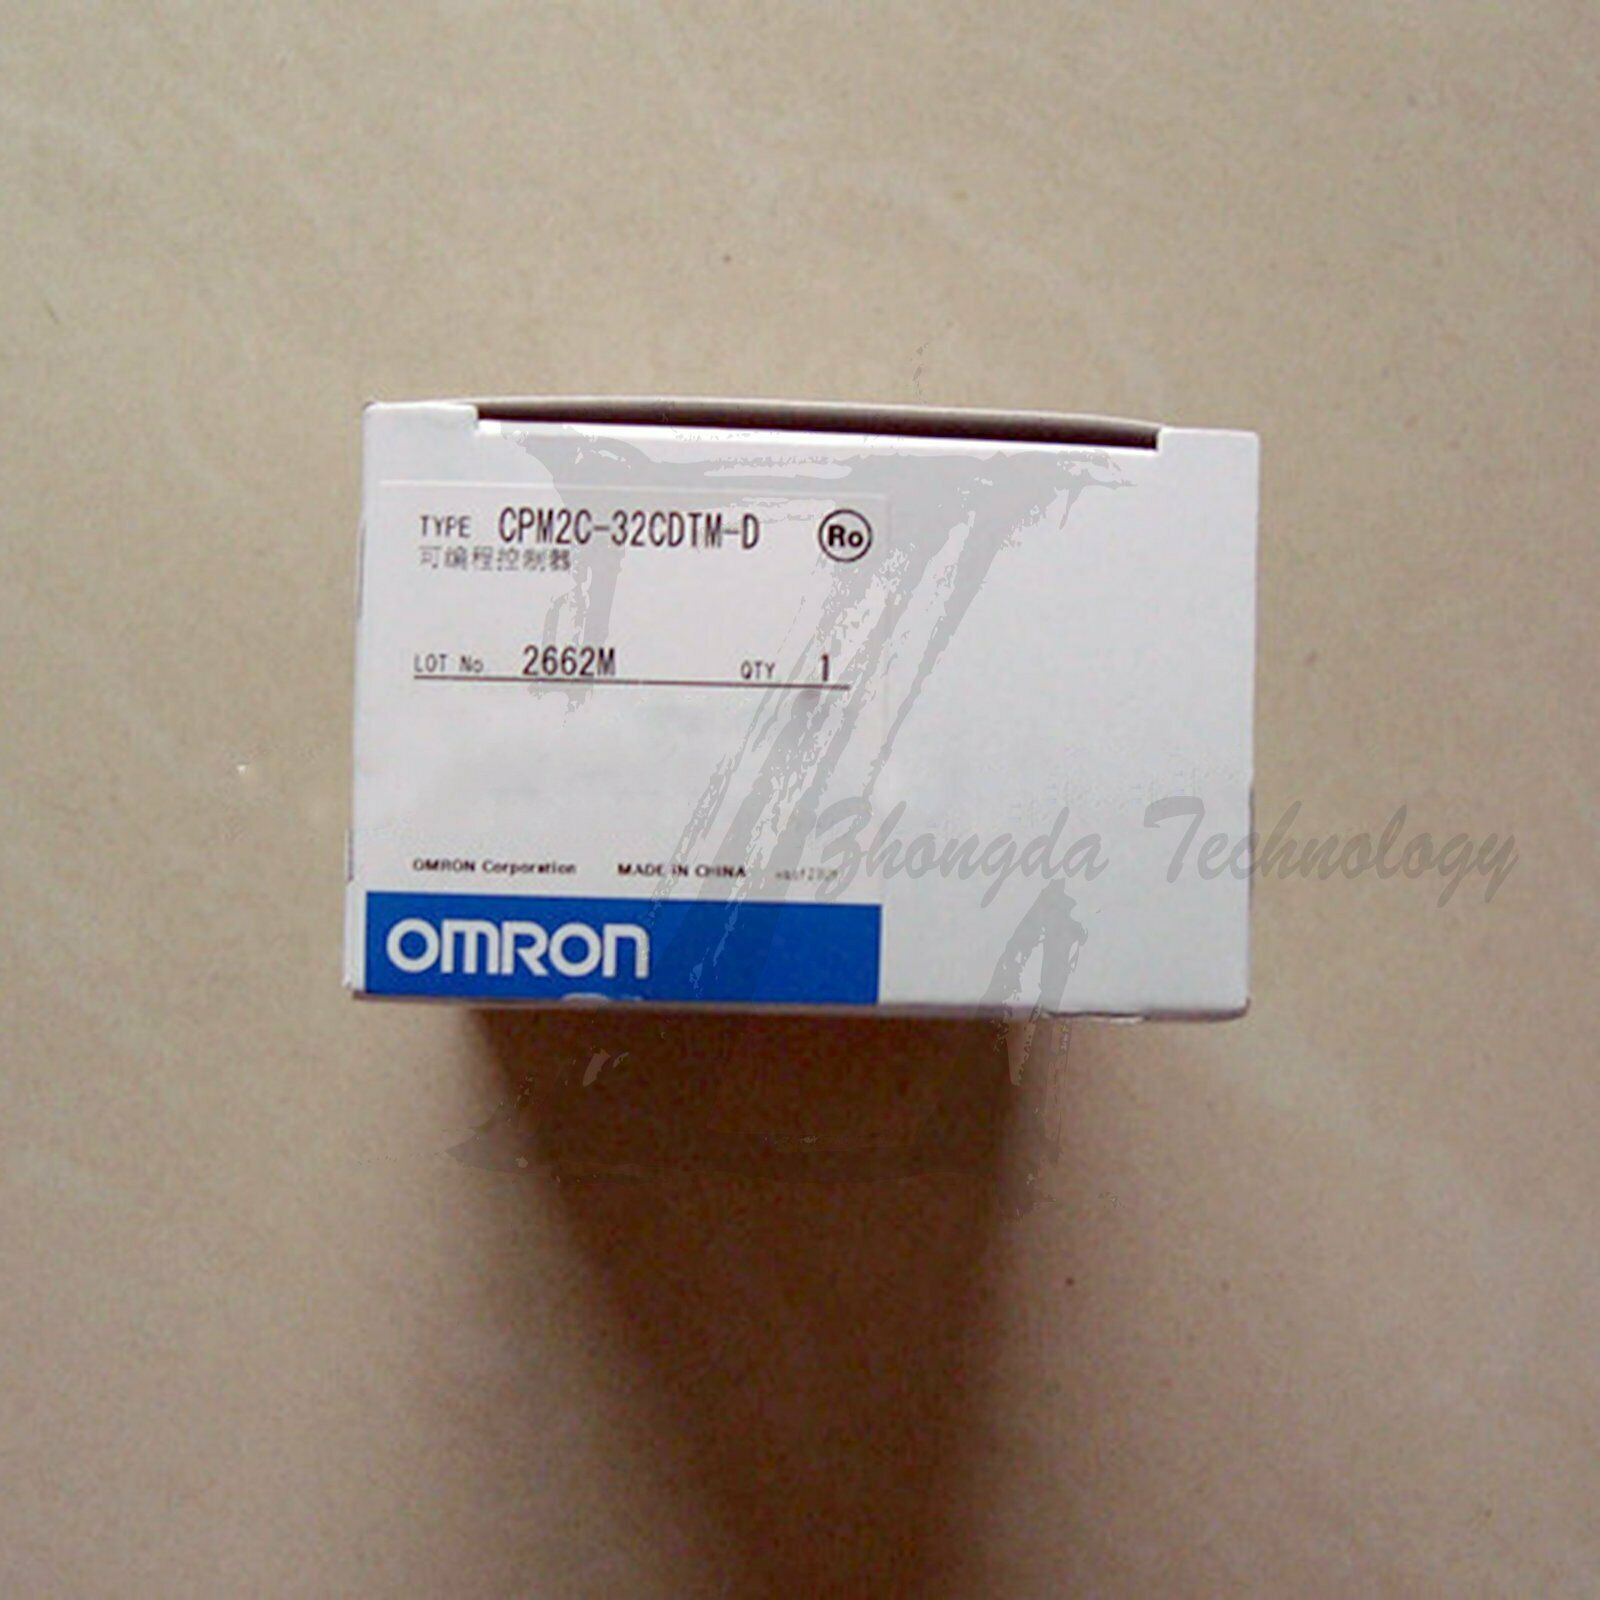 NEW OMRON PLC Programmable Controller CPM2C-32CDTM-D